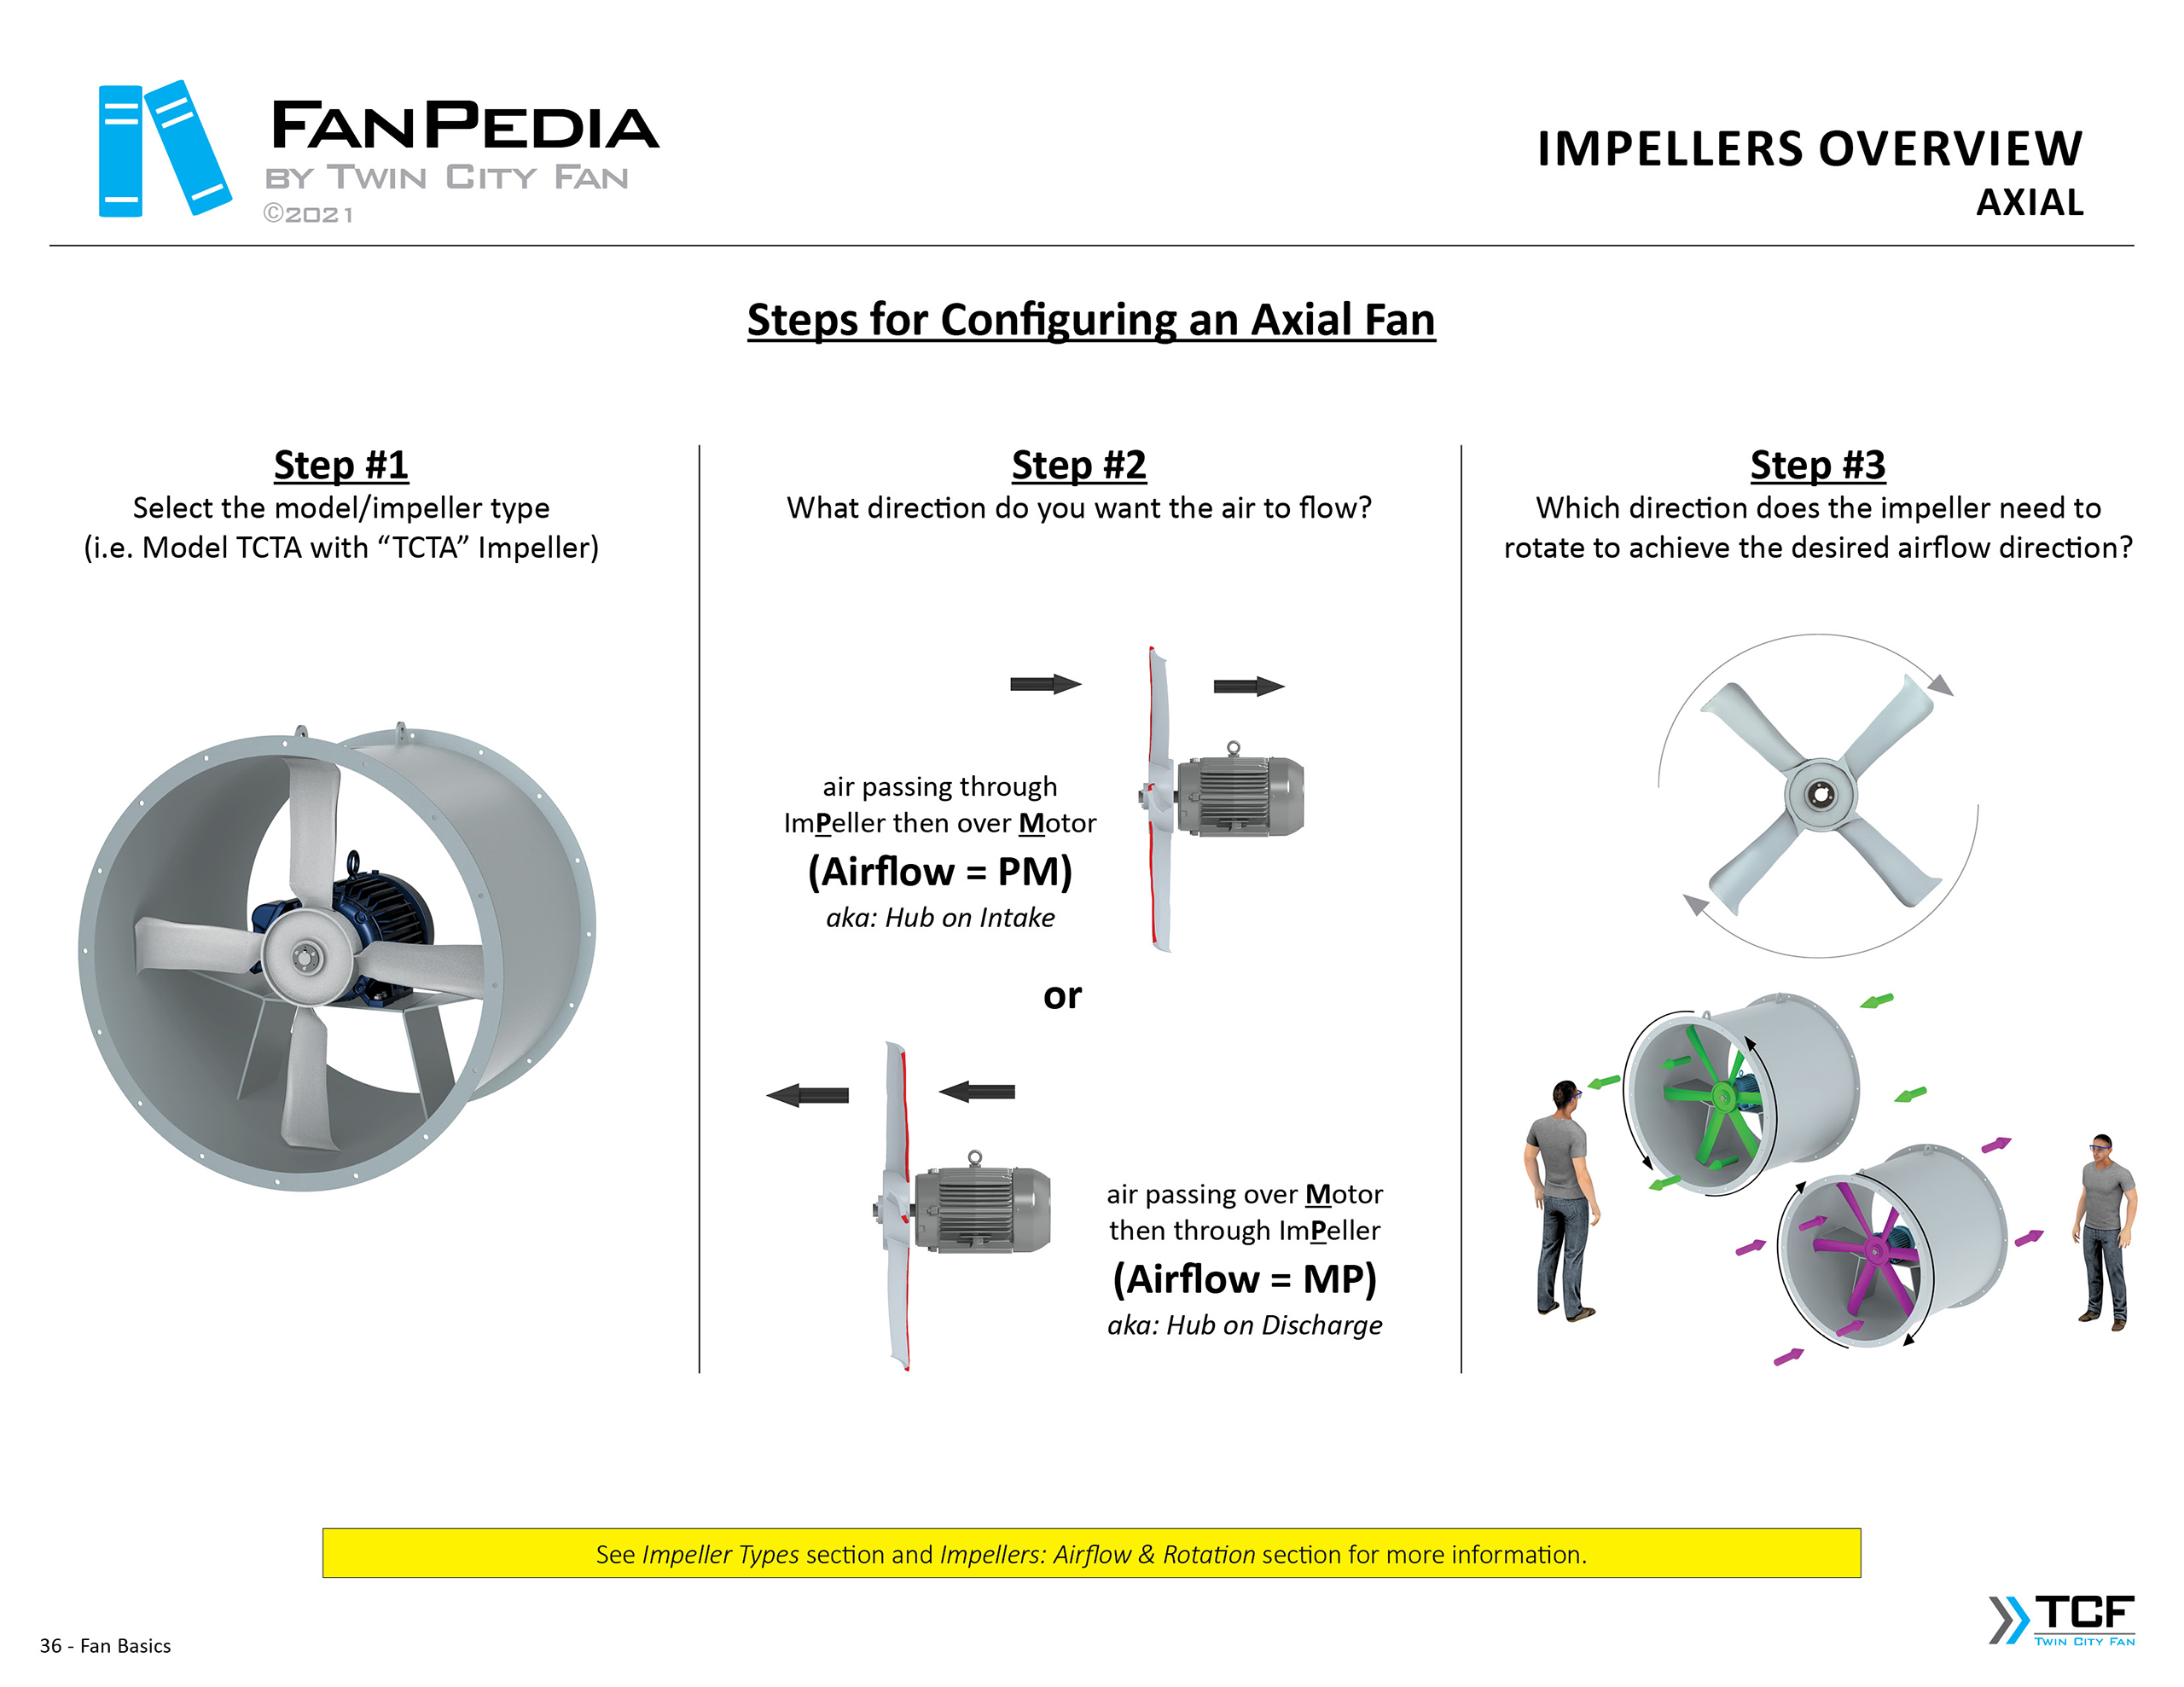 Fan Basics - Impellers Overview (Axial) 2